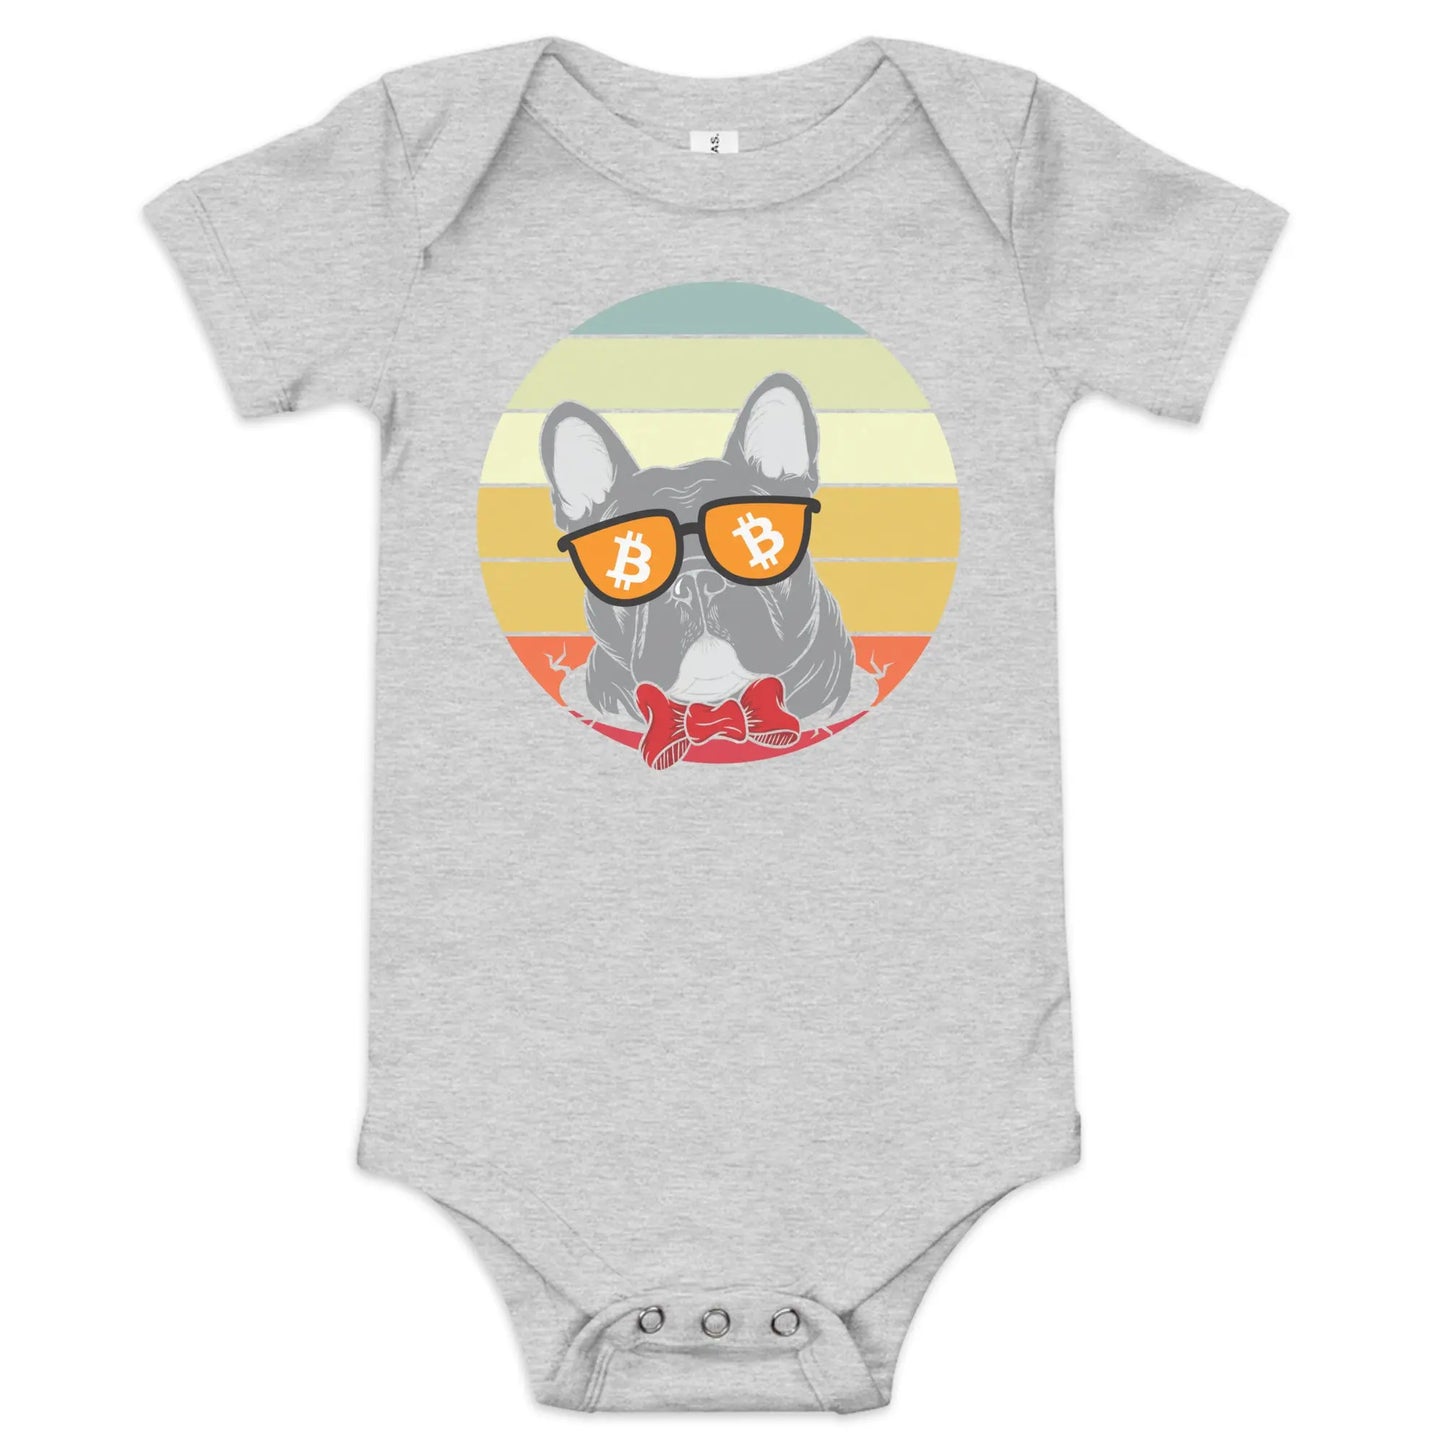 Vintage Dog Lovers - Bitcoin Baby Body Suit - One Piece with Short Sleeve Athletic Heather